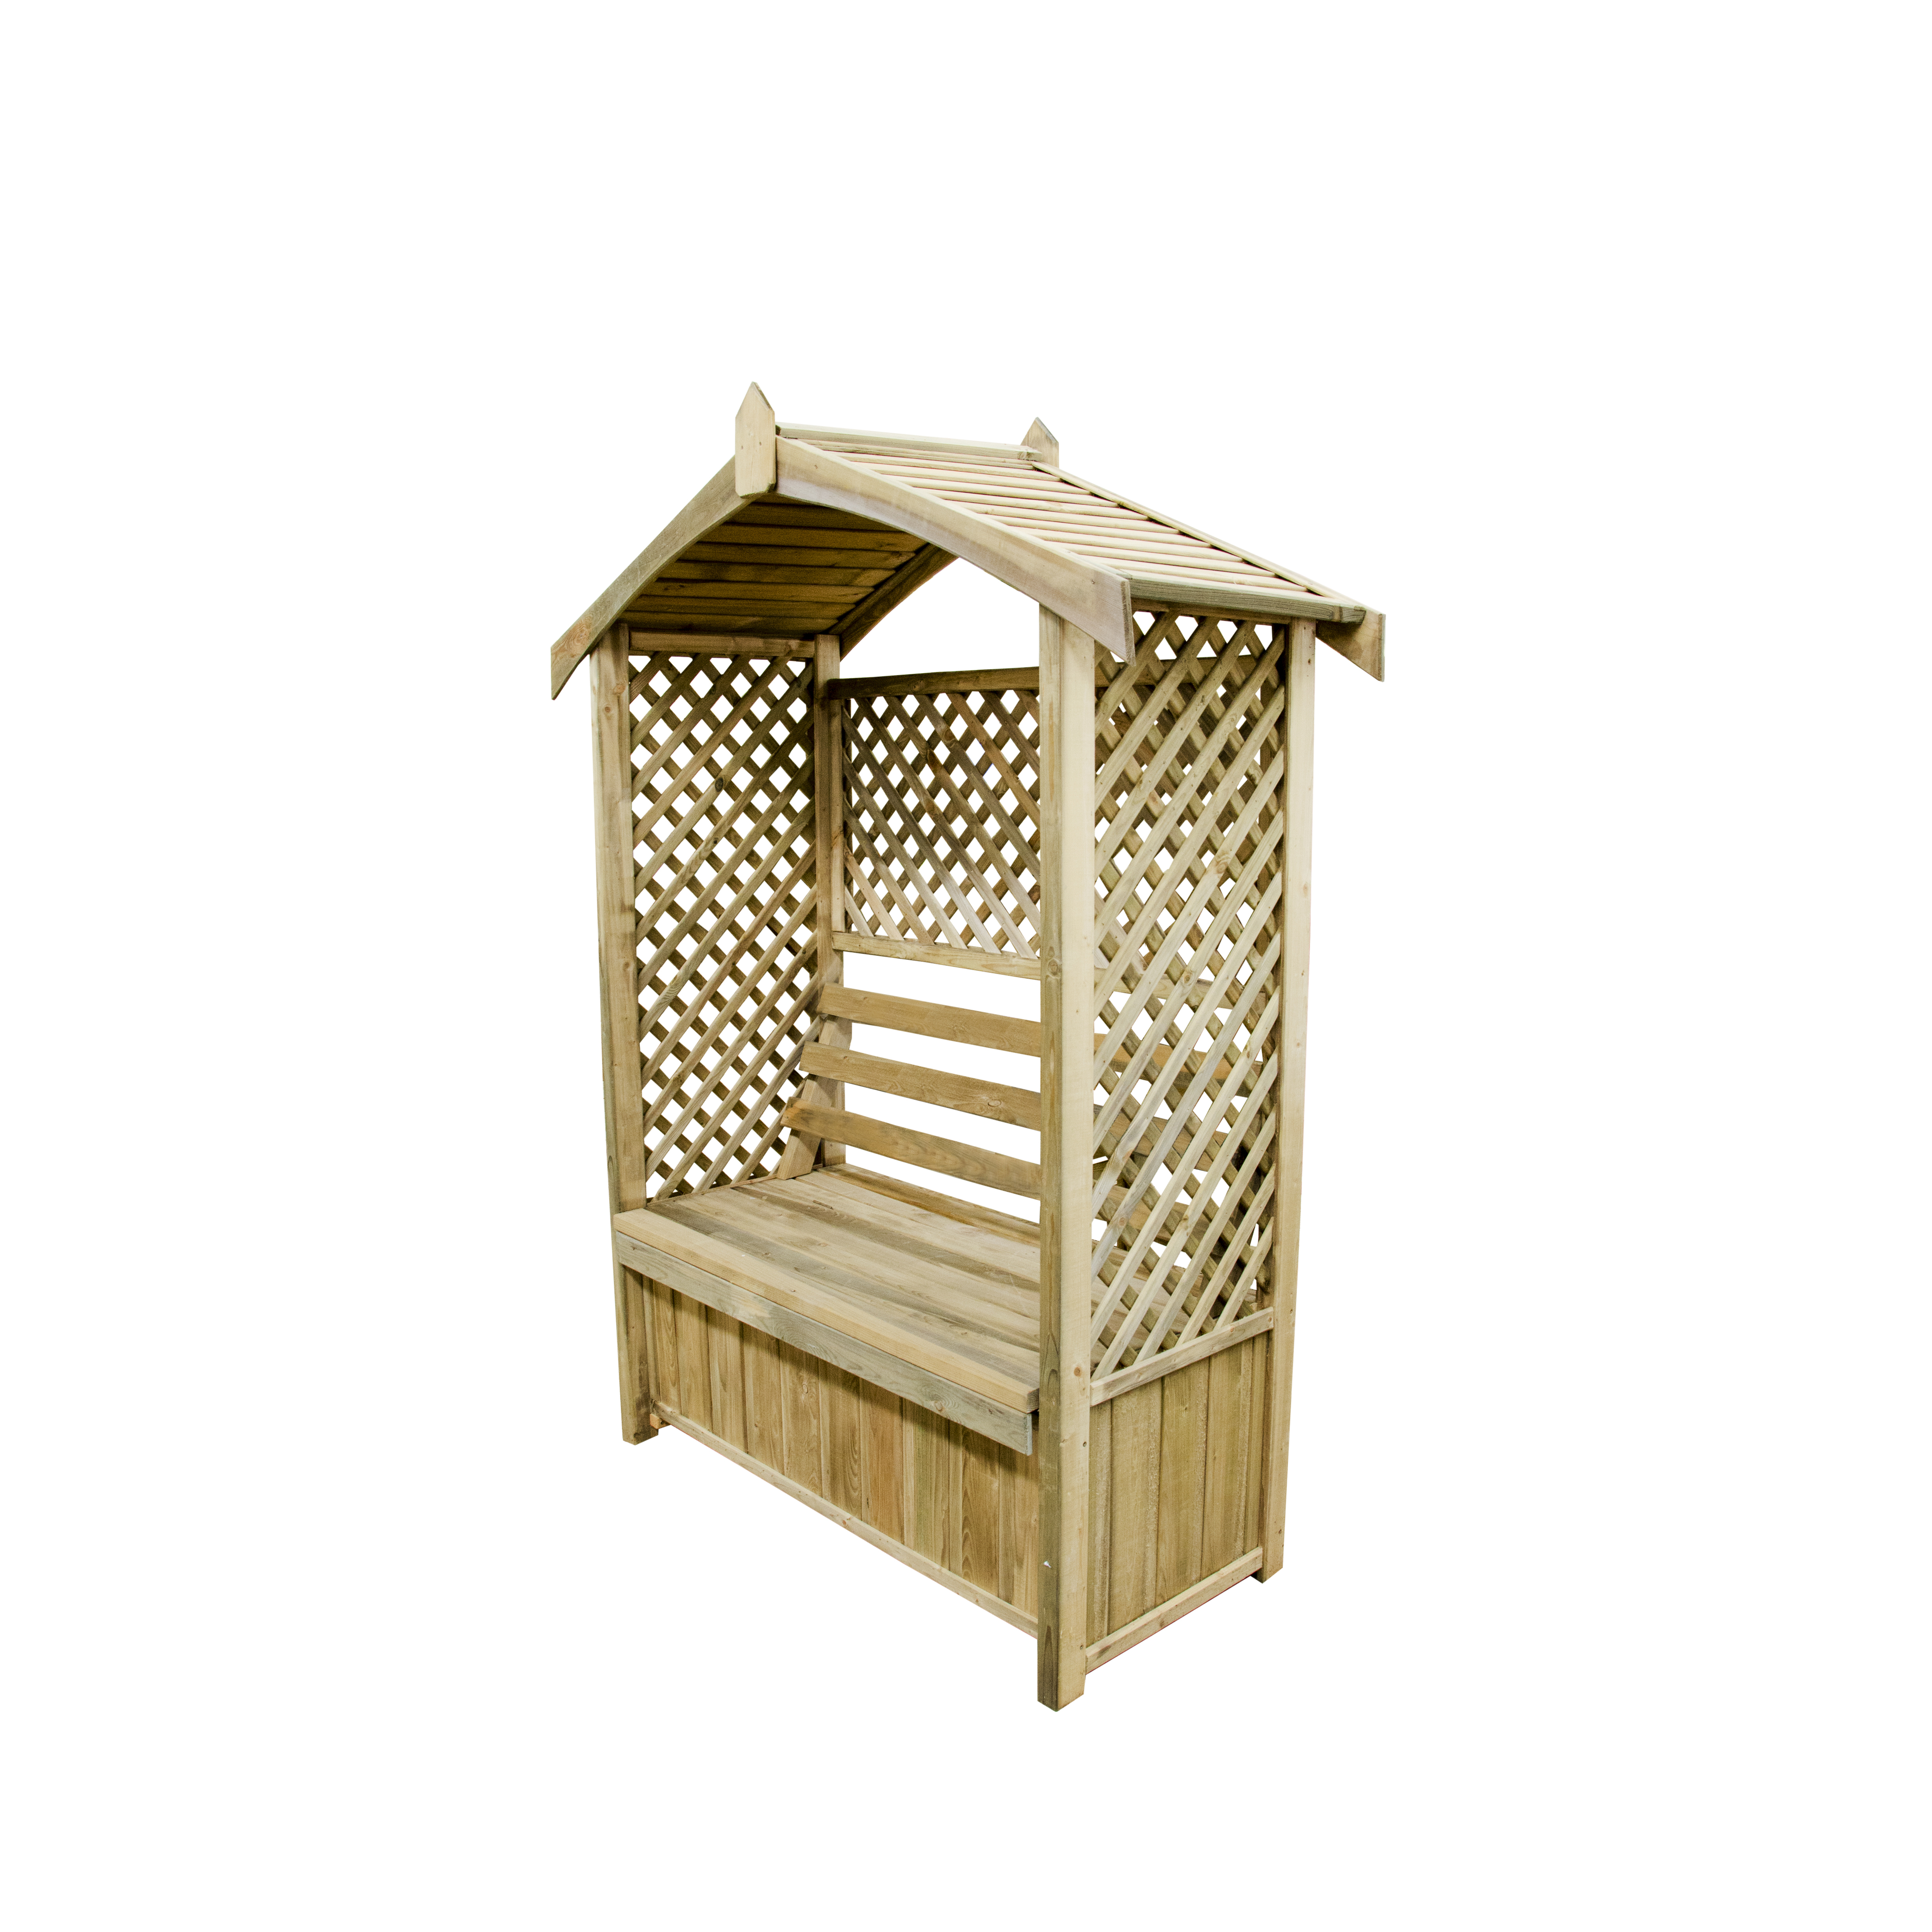 Lyas arbour Outdoor